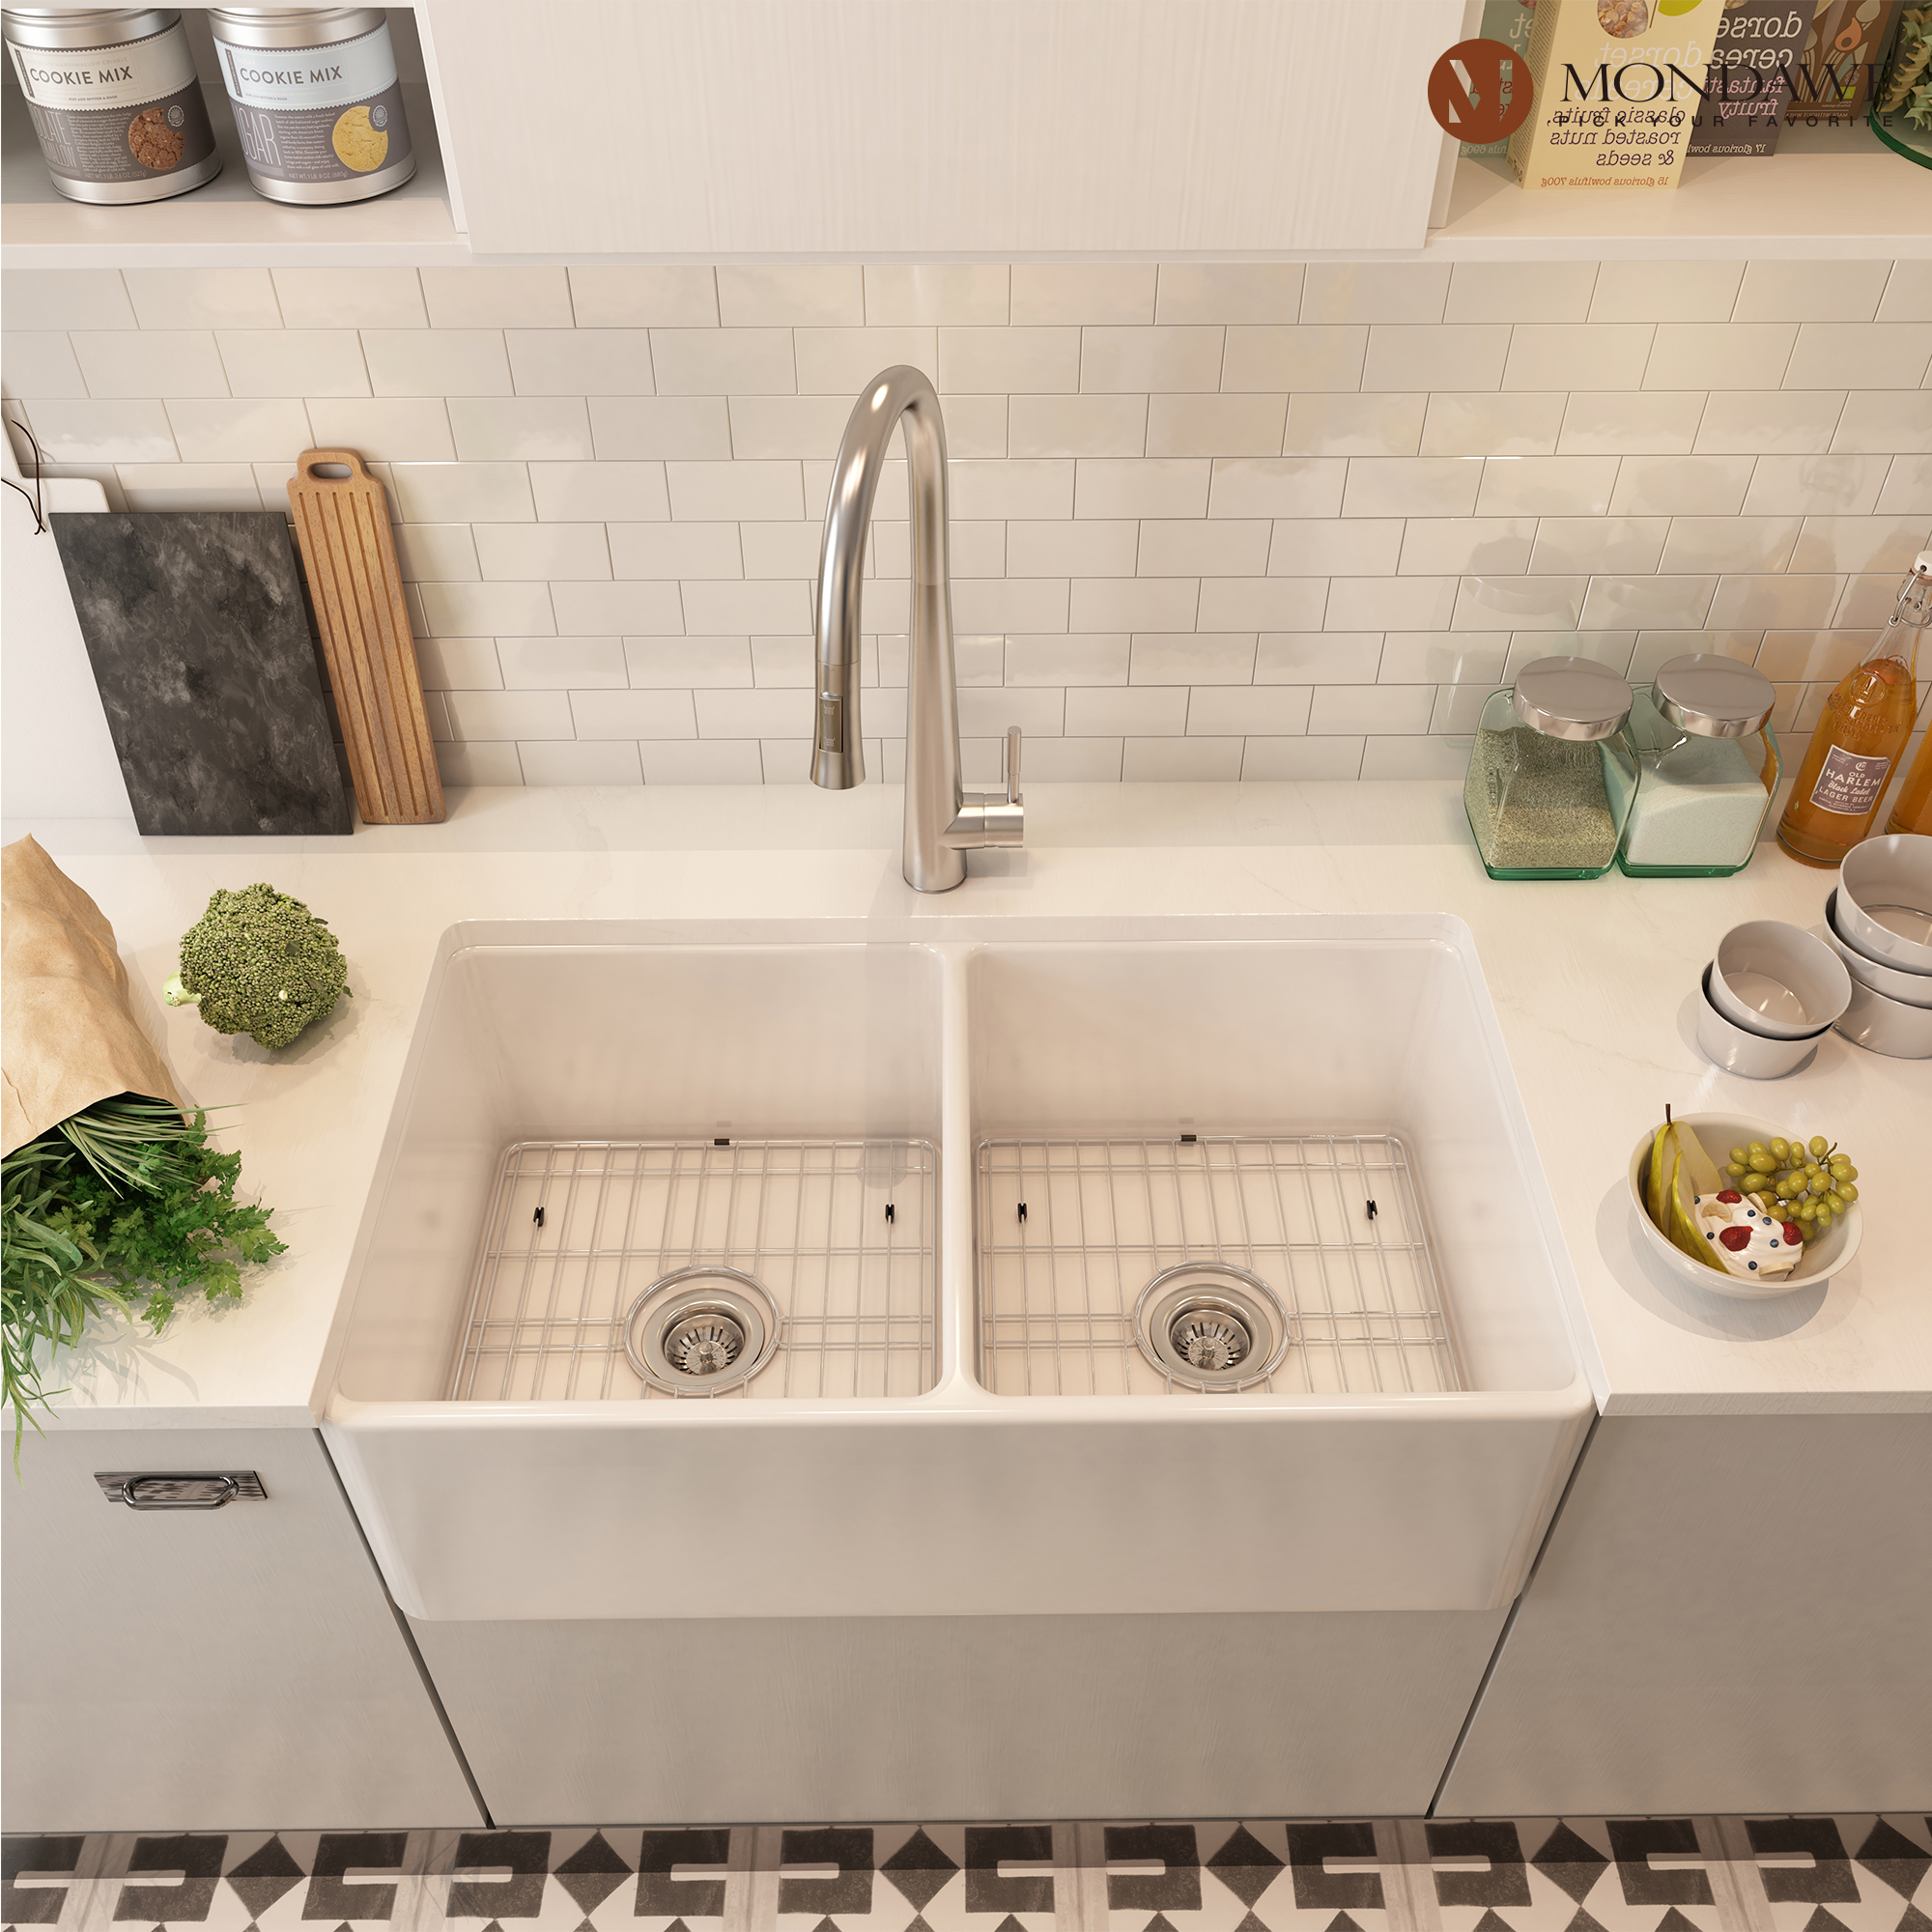 Double Bowl Fireclay Kitchen Sink in White